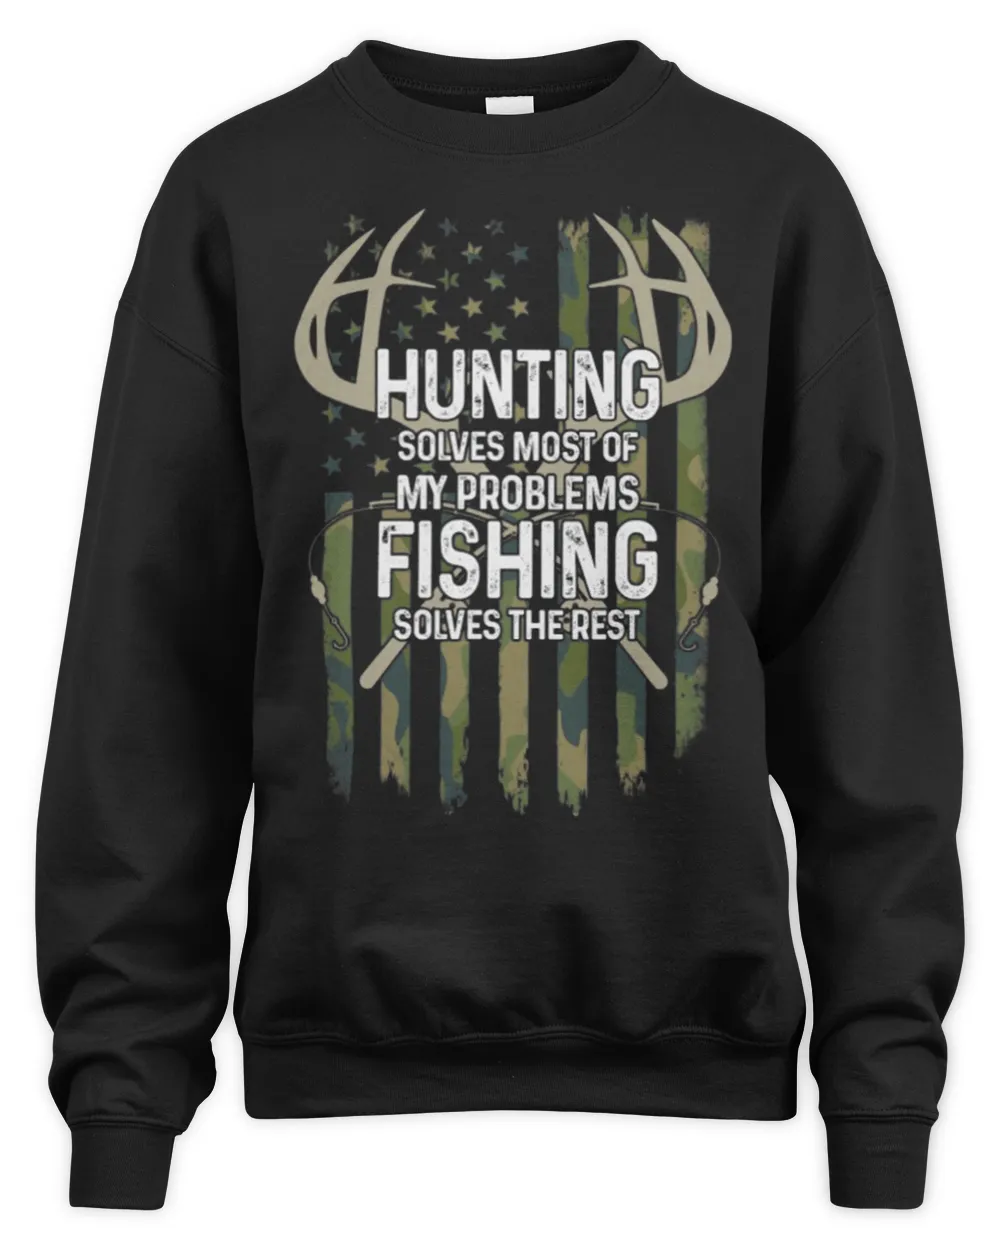 Hunting Solves Most Of My Problems Fishing Solves The Rest